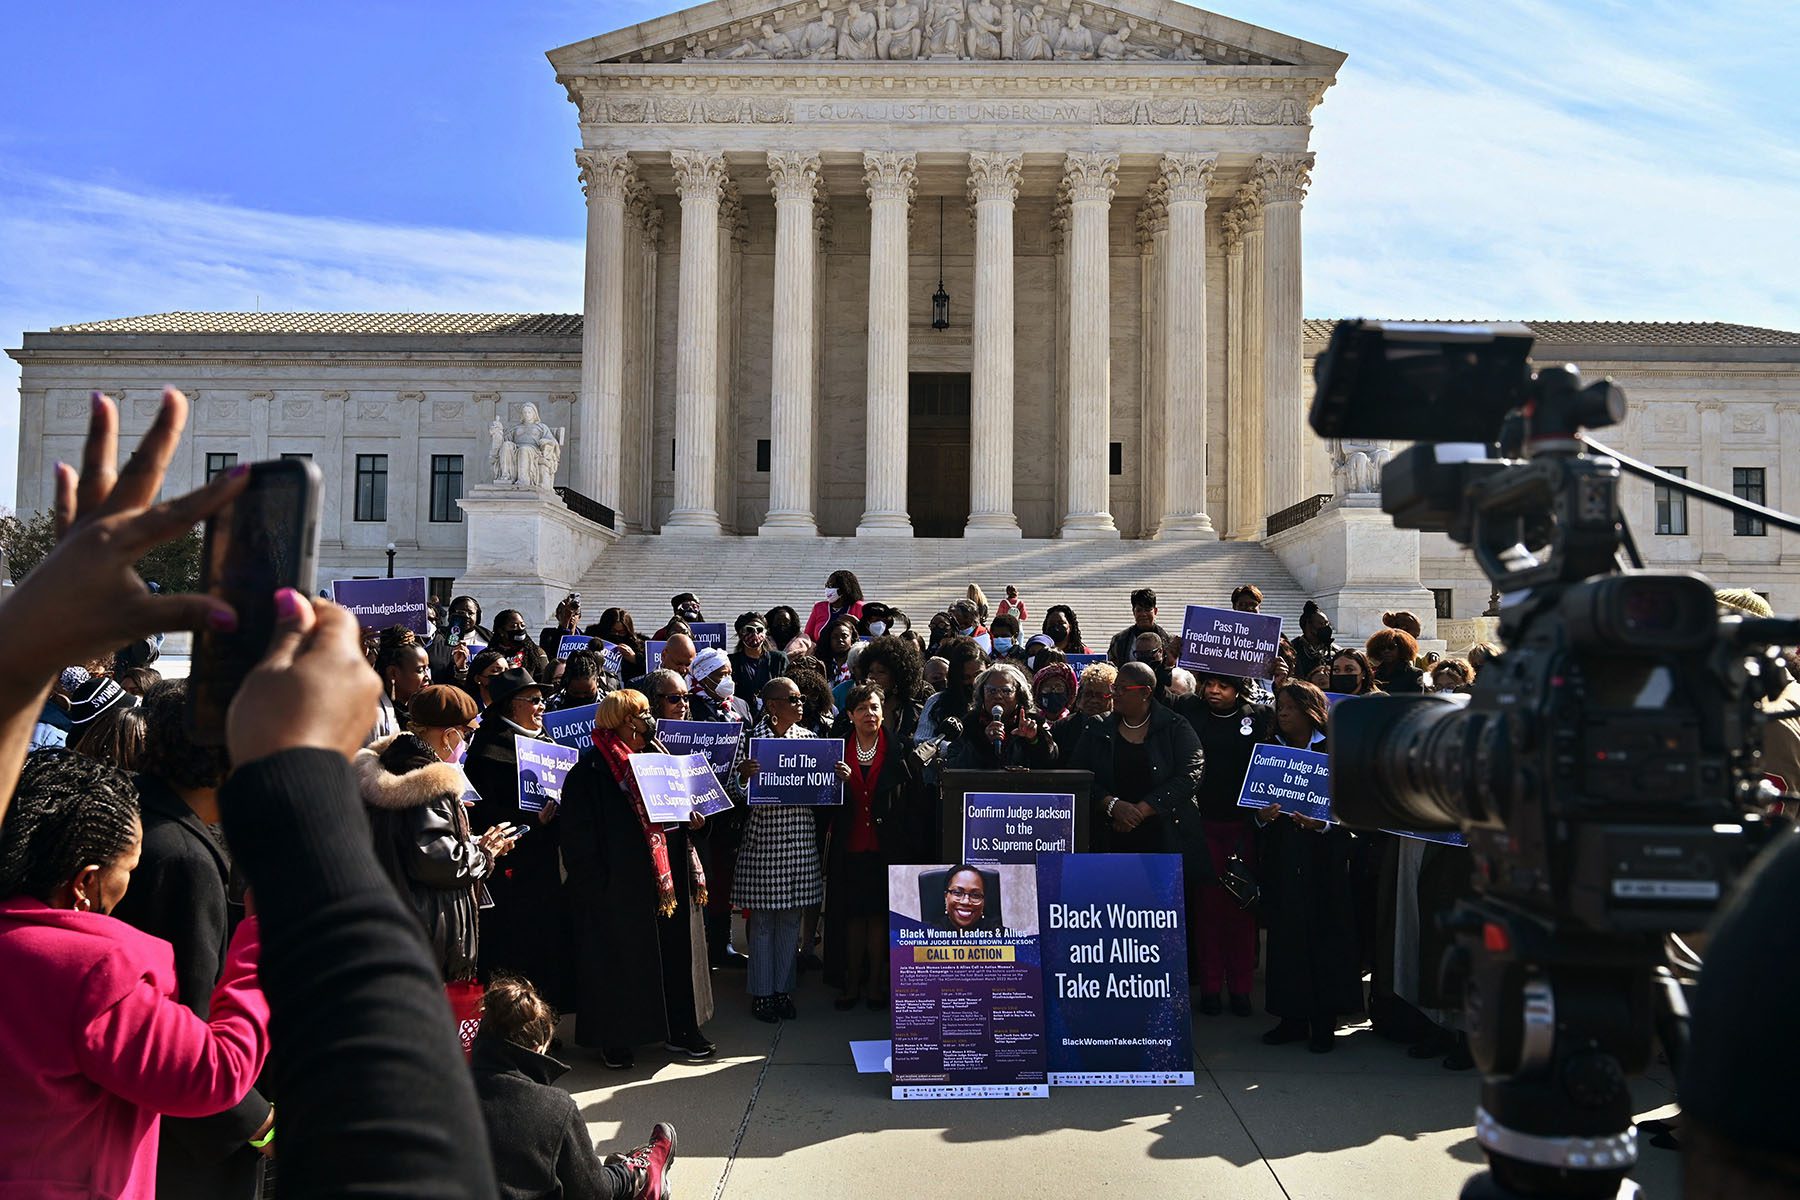 Activists hold a press conference in front of the U.S. Supreme Court. Signs read "Confirm Judge Jackson in the U.S. Supreme Court."